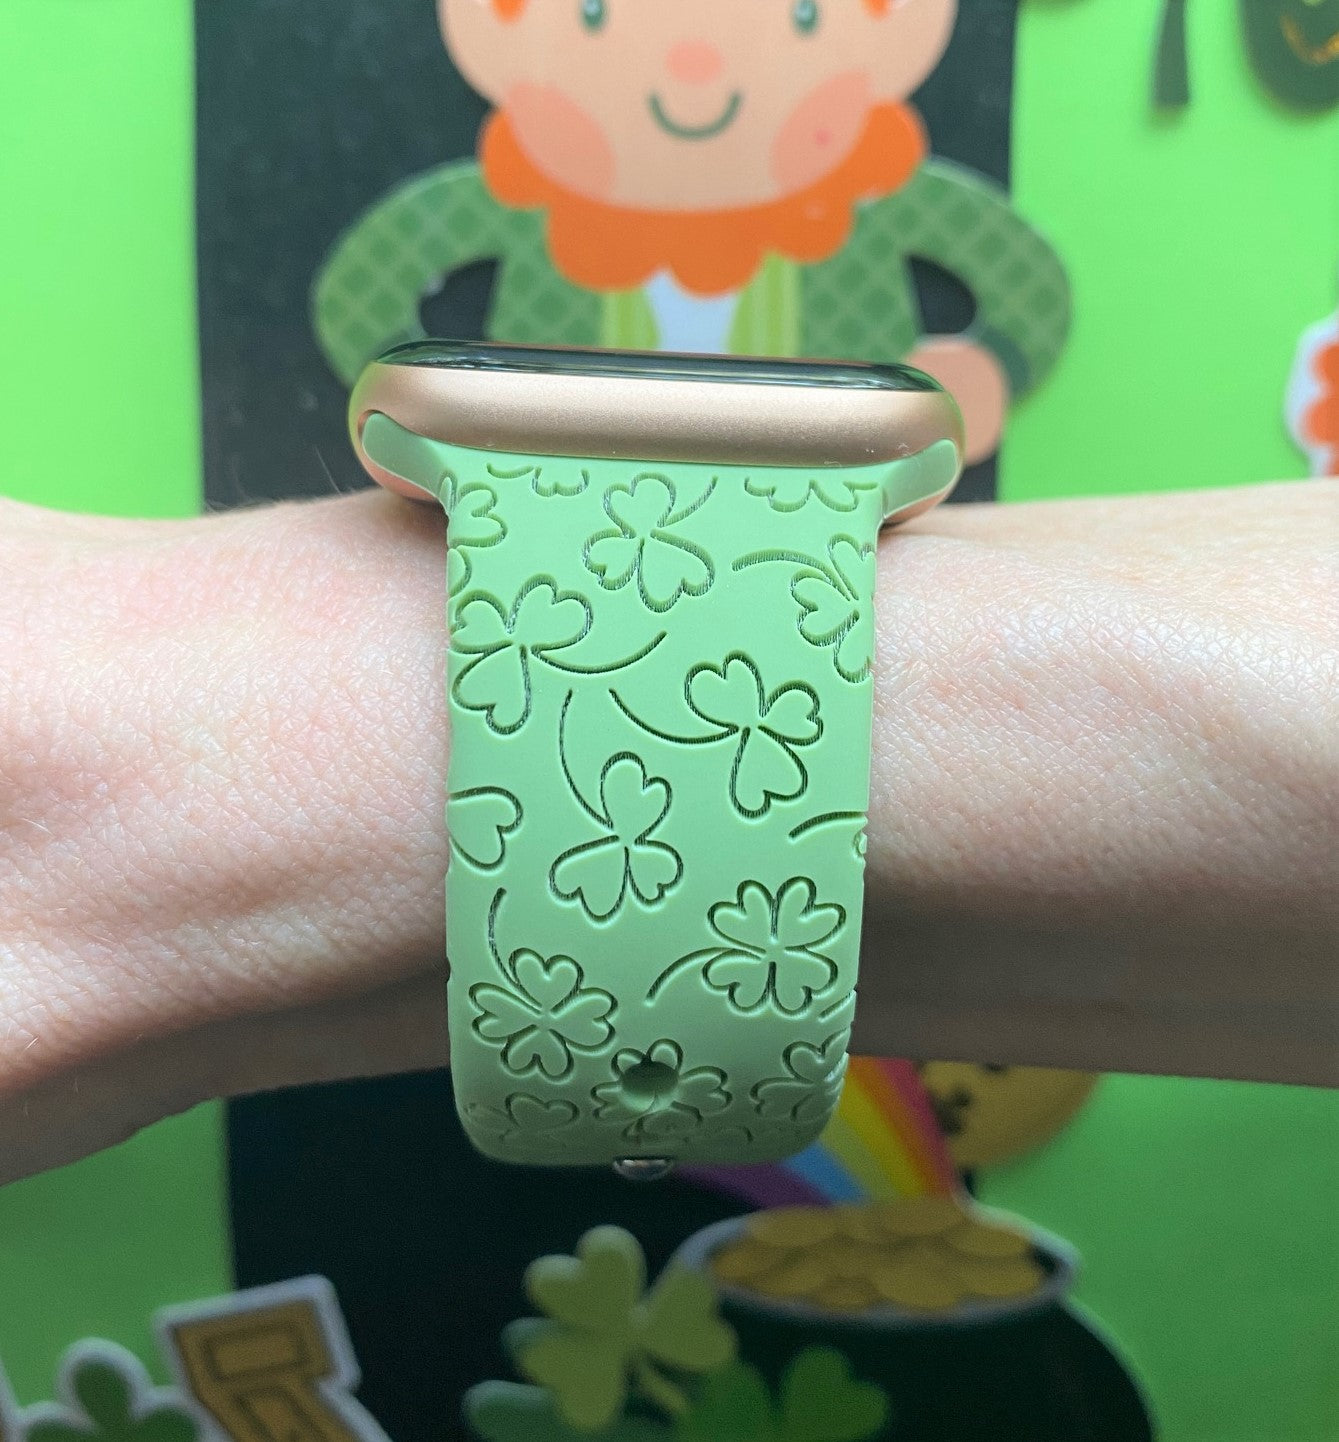 St Patty's Day Clover Apple Watch Band